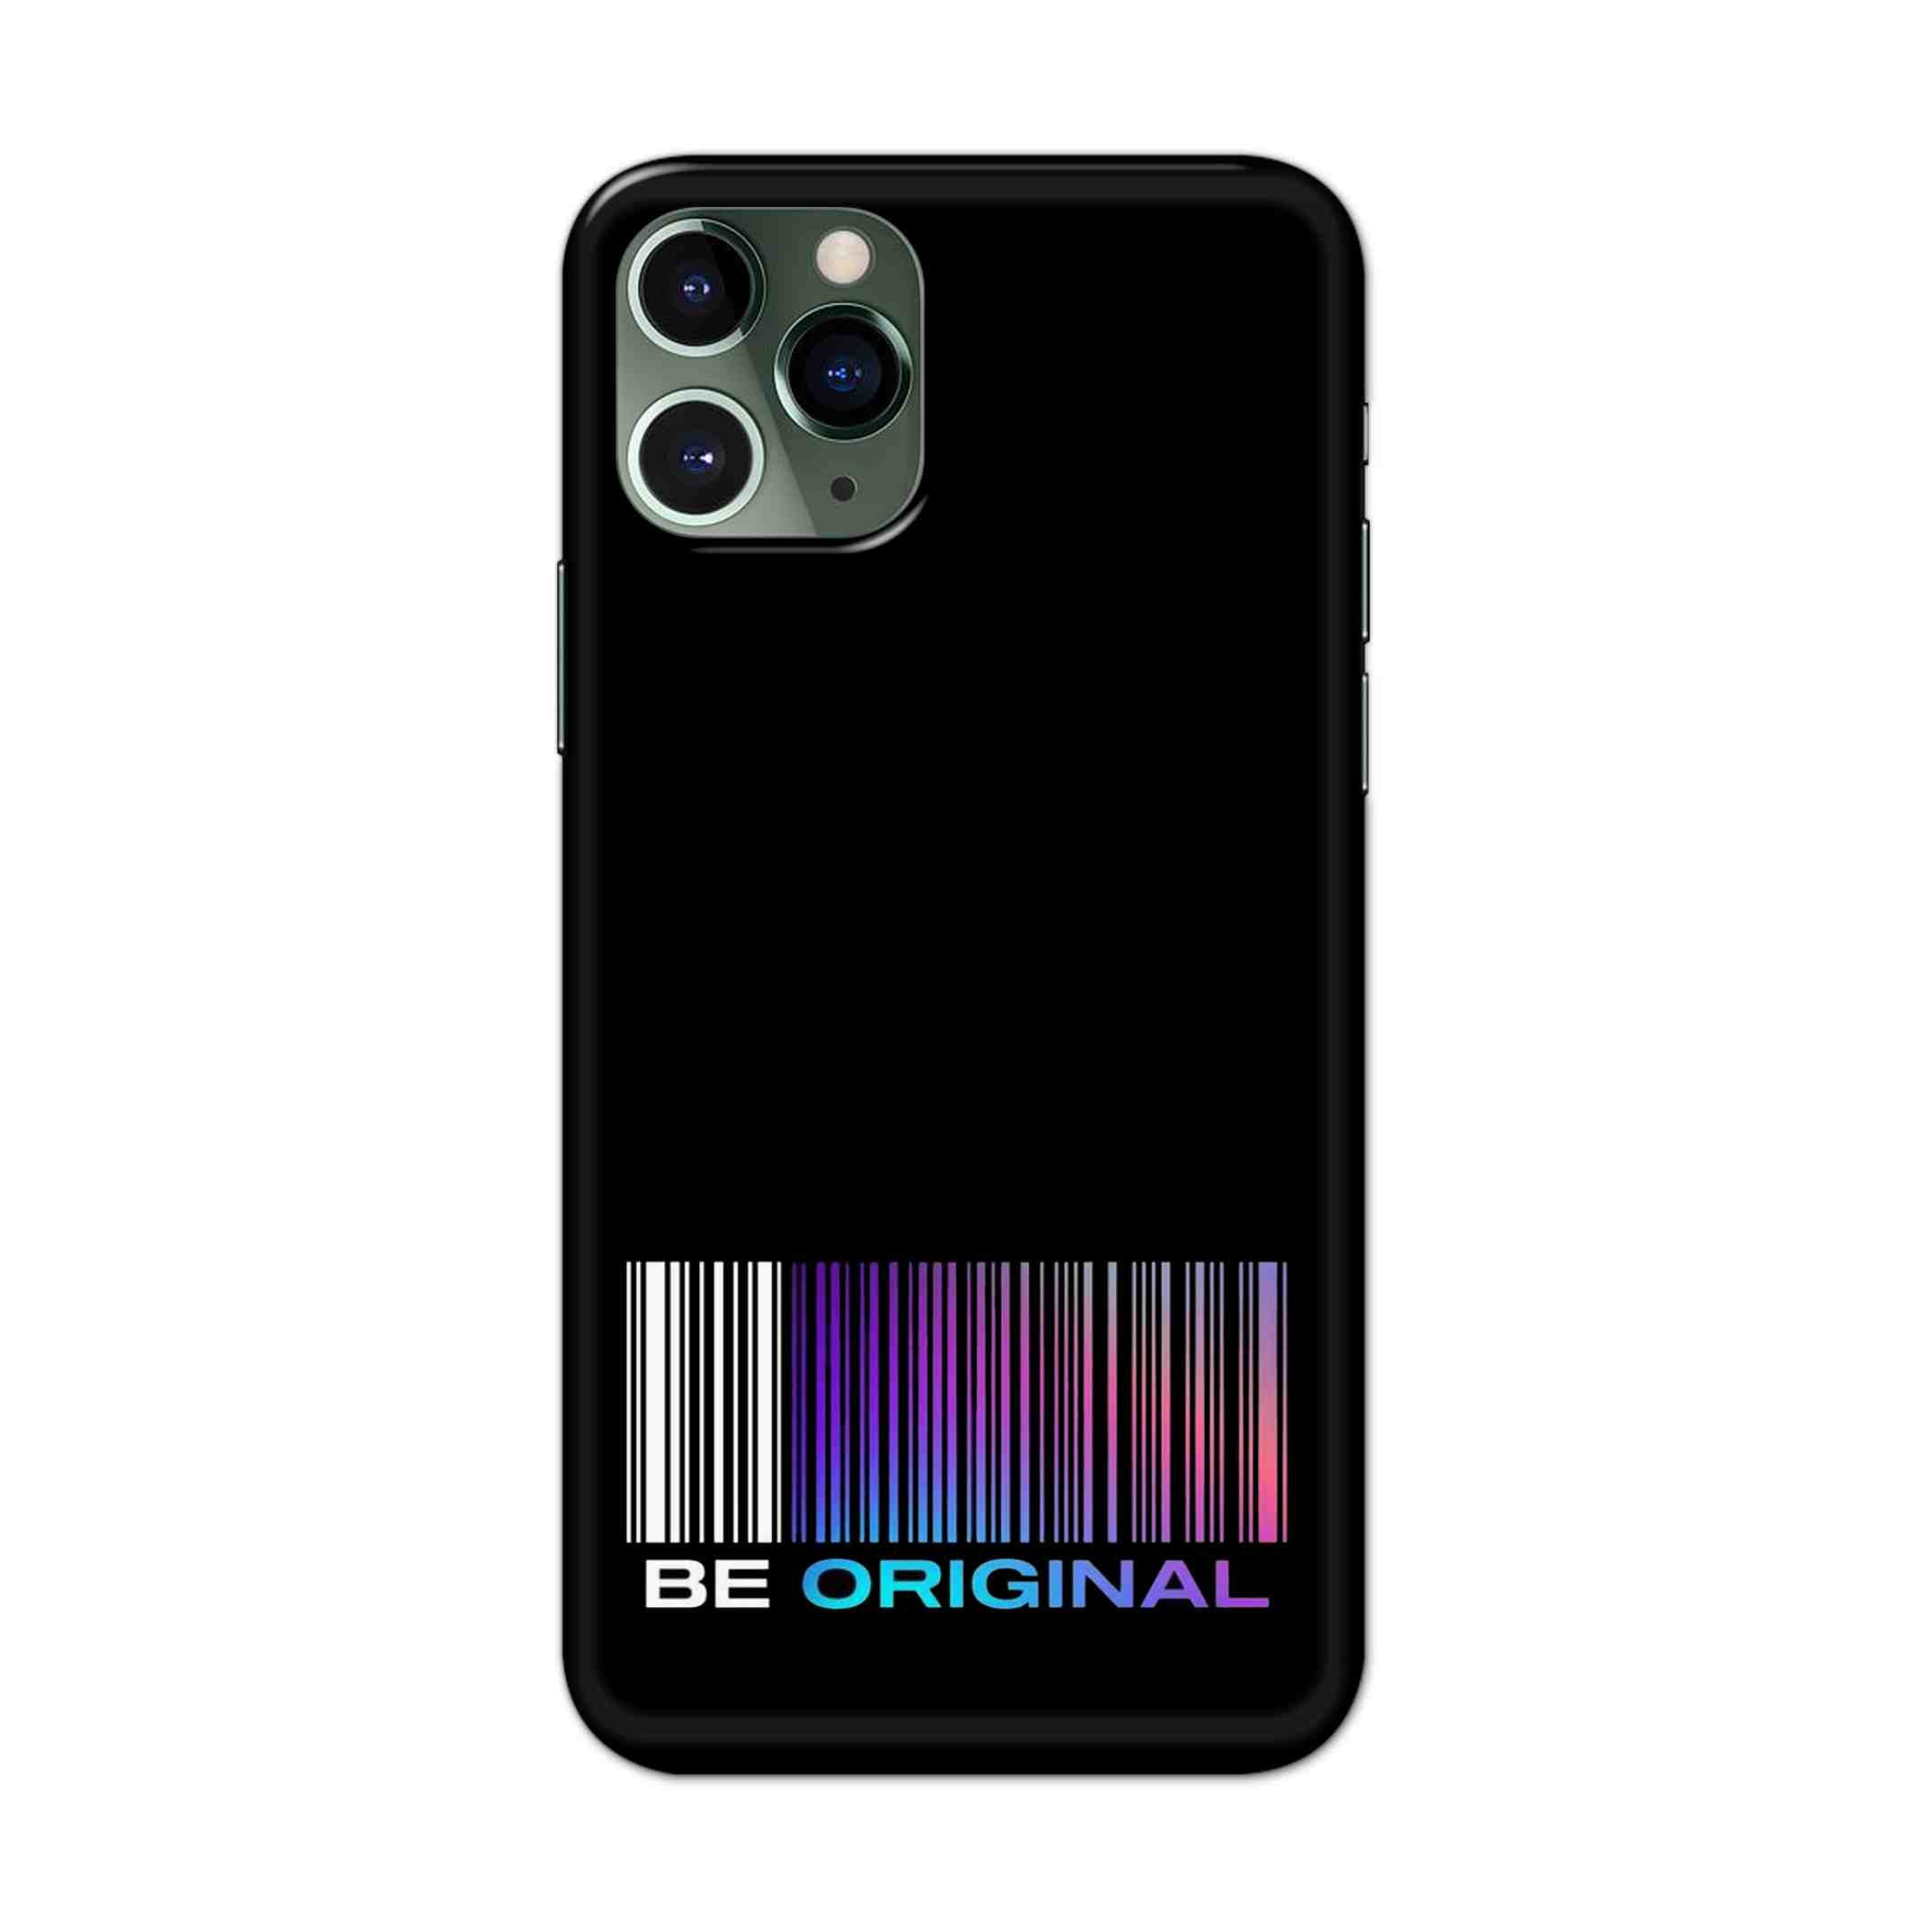 Buy Be Original Hard Back Mobile Phone Case/Cover For iPhone 11 Pro Max Online